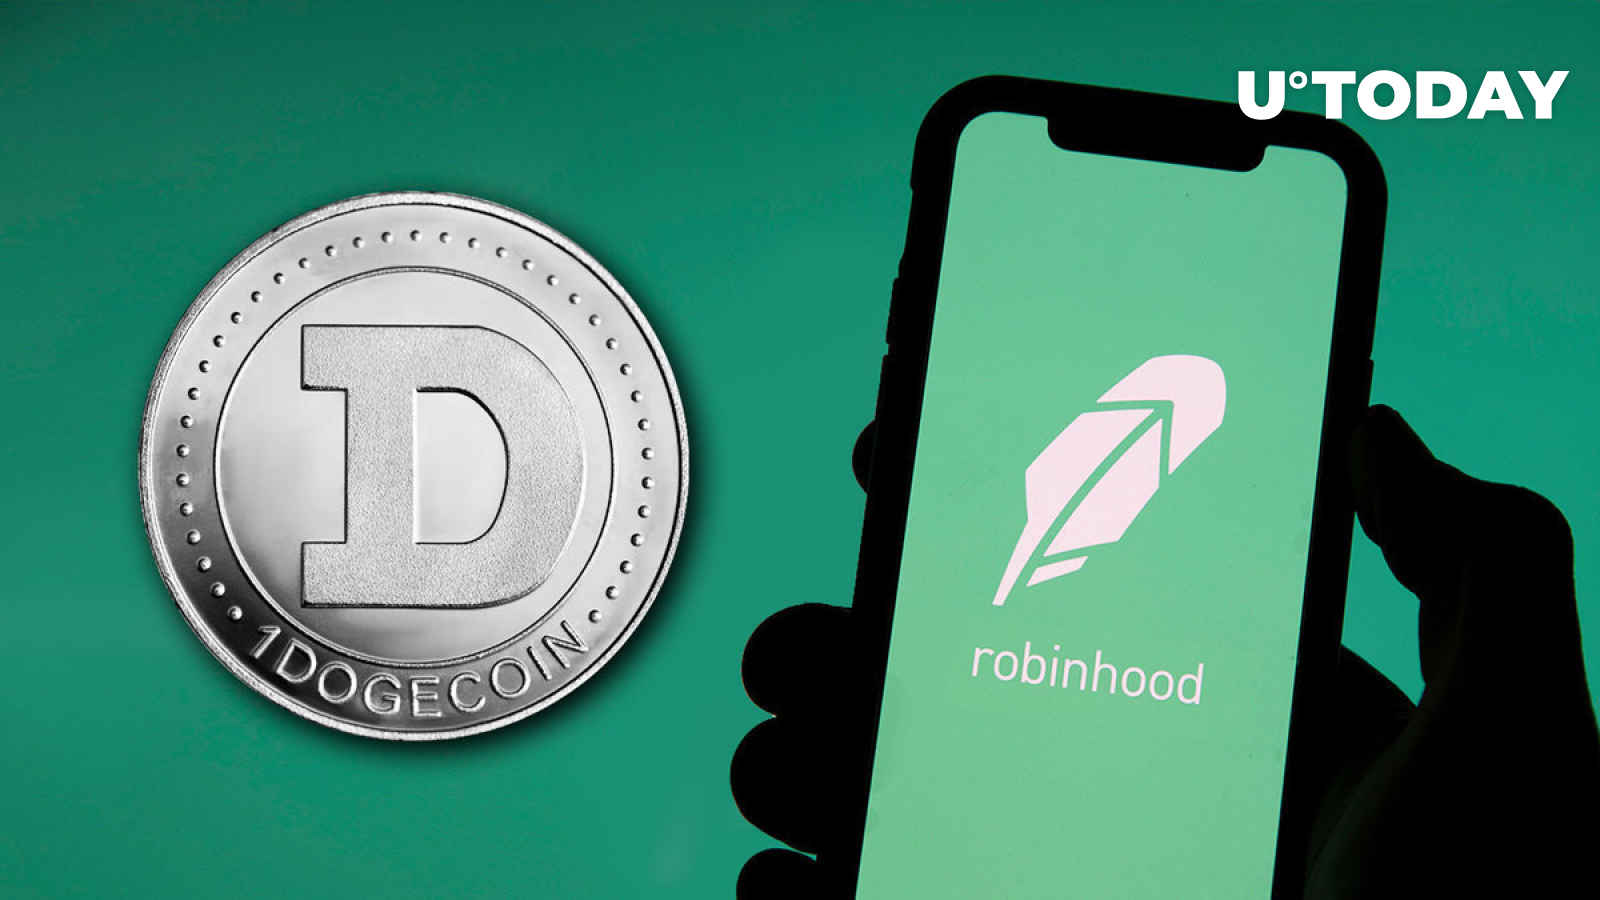 usd1-billion-in-doge-grabbed-by-robinhood-customers-holdings-show-11-16-rise